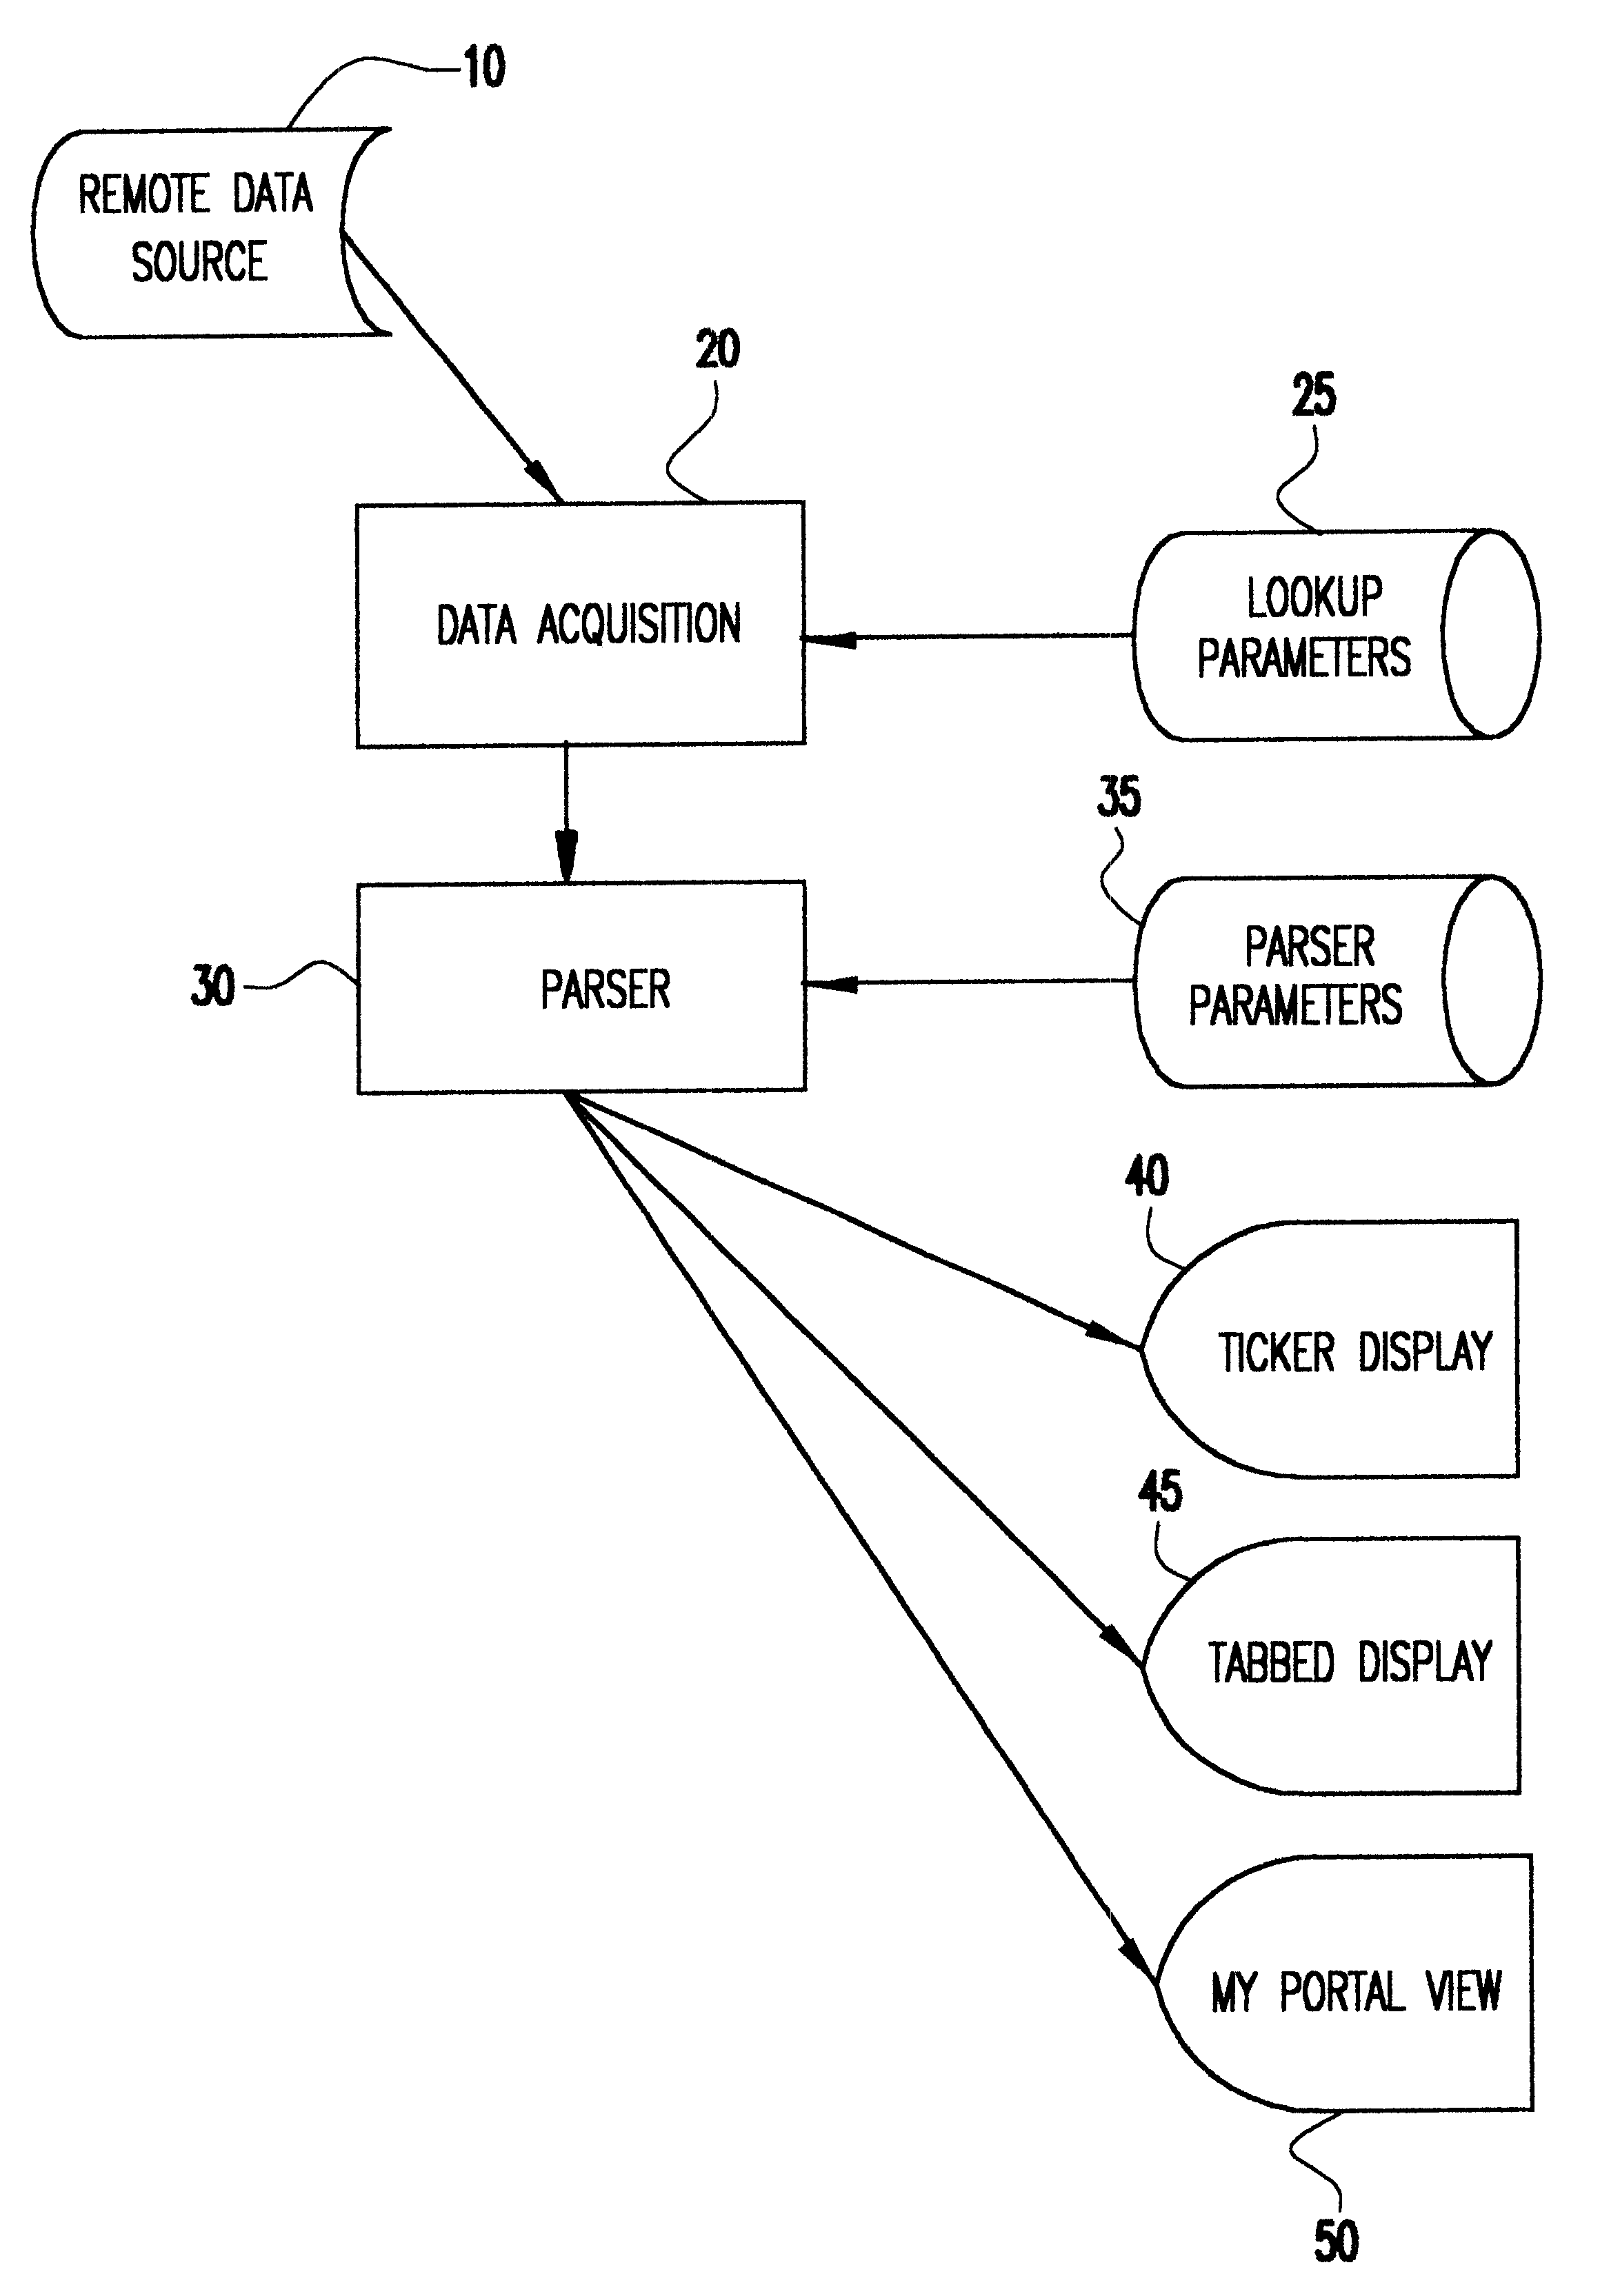 System for collecting and displaying summary information from disparate sources